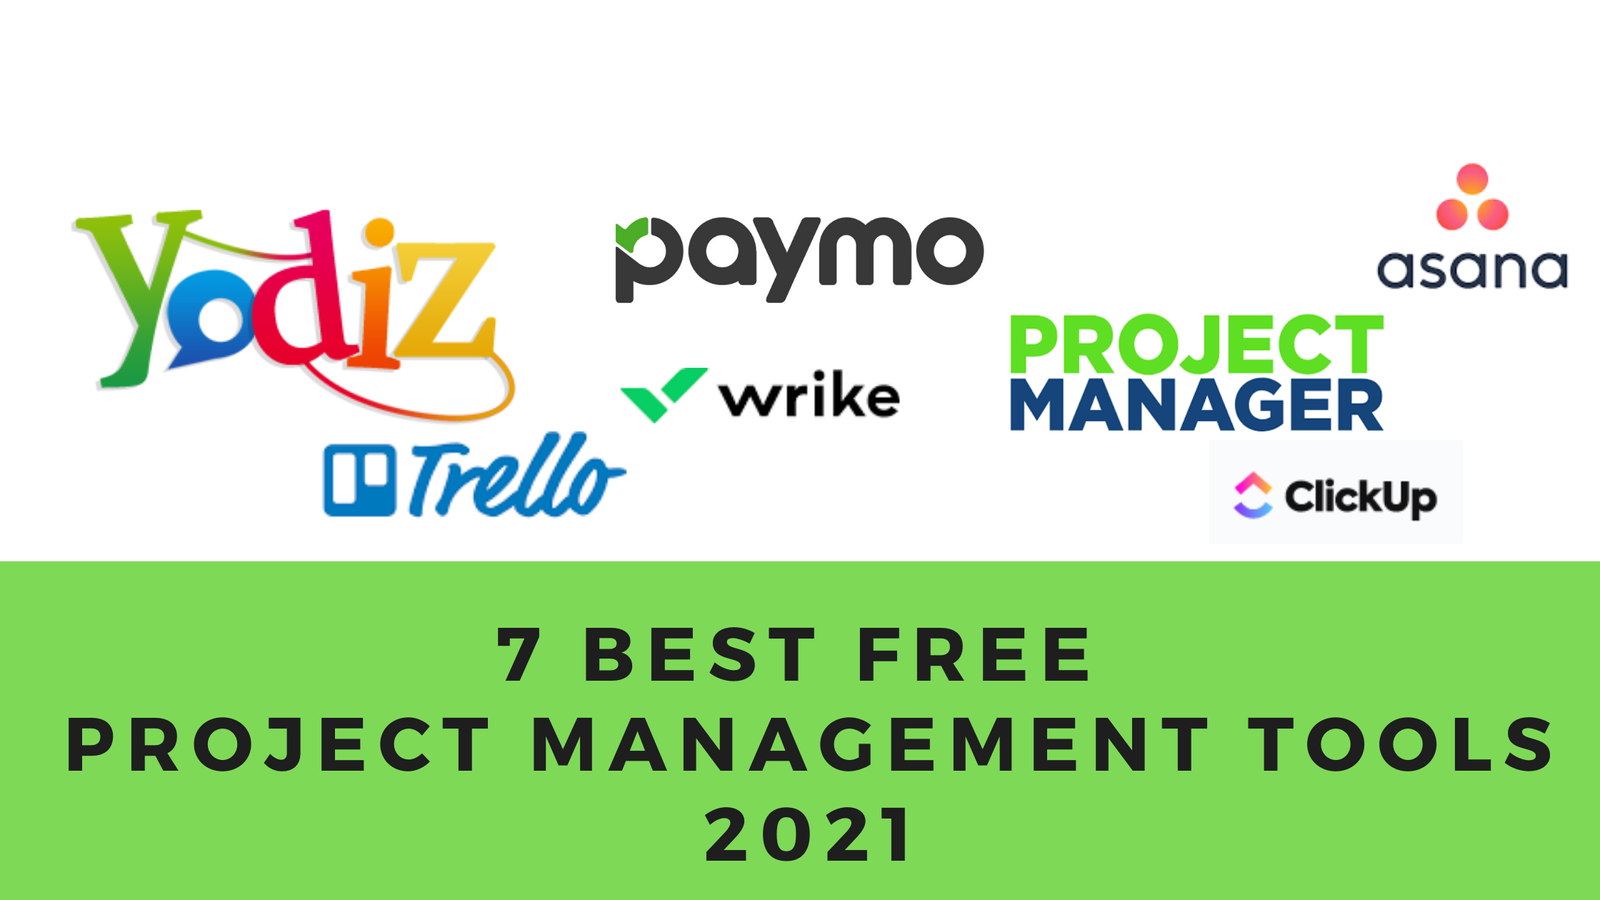 best free project management tools 2021 (1)